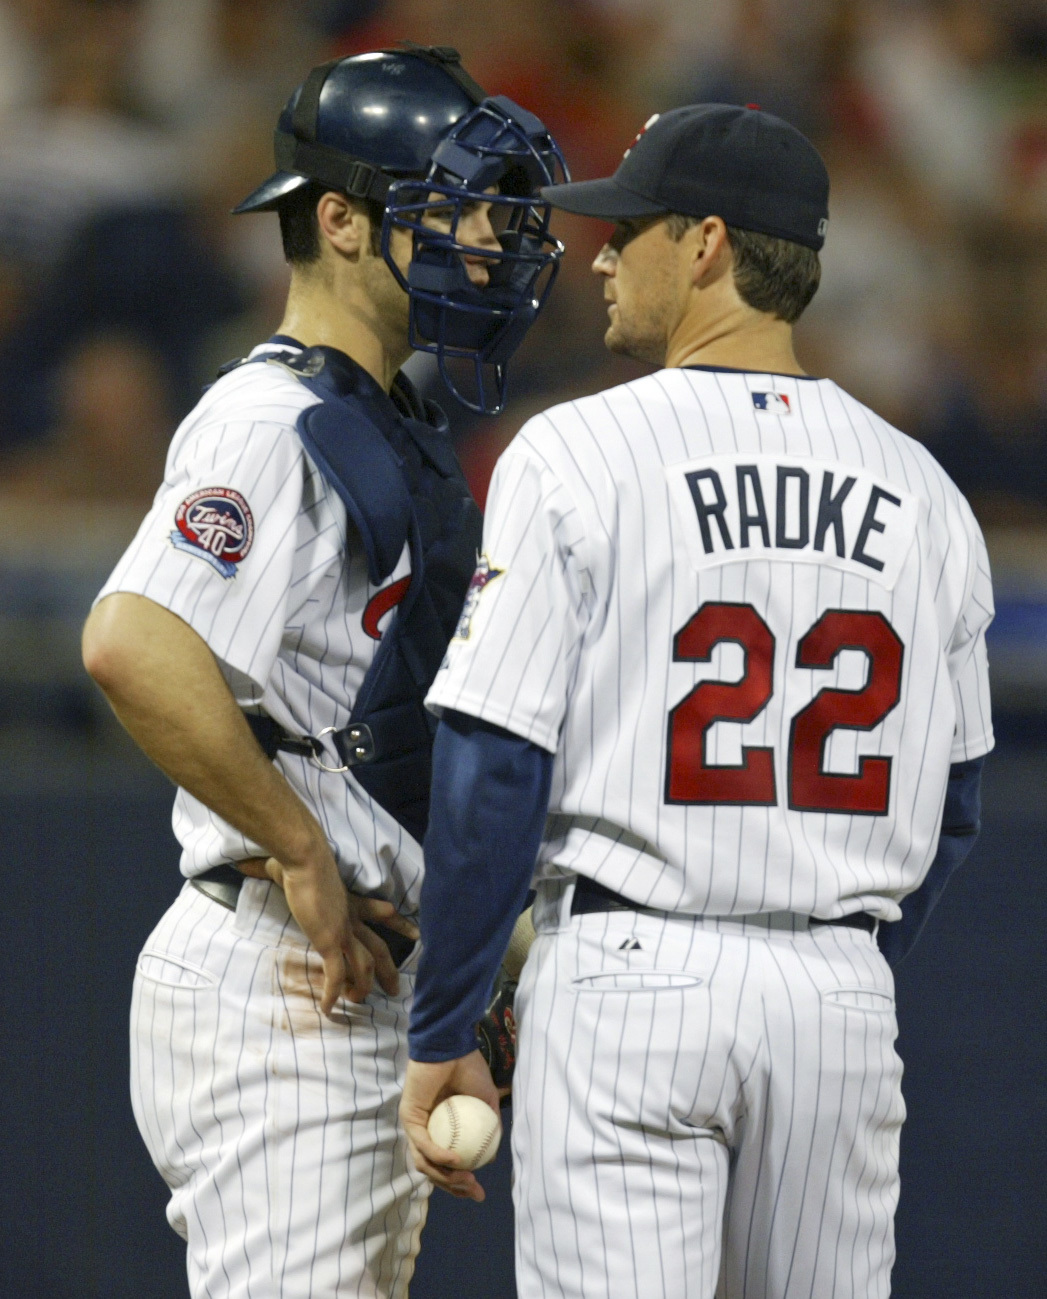 Bruce Bisping/Star Tribune. Minneapolis, MN., Wednesday, 6/29/2005. Minnesota Twins vs. KC Royals. (left to right) Twins catcher Joe Mauer and pitcher Brad Radke talked on the mound during the 4th inning. Radke gave up two runs in the 1st inning and o